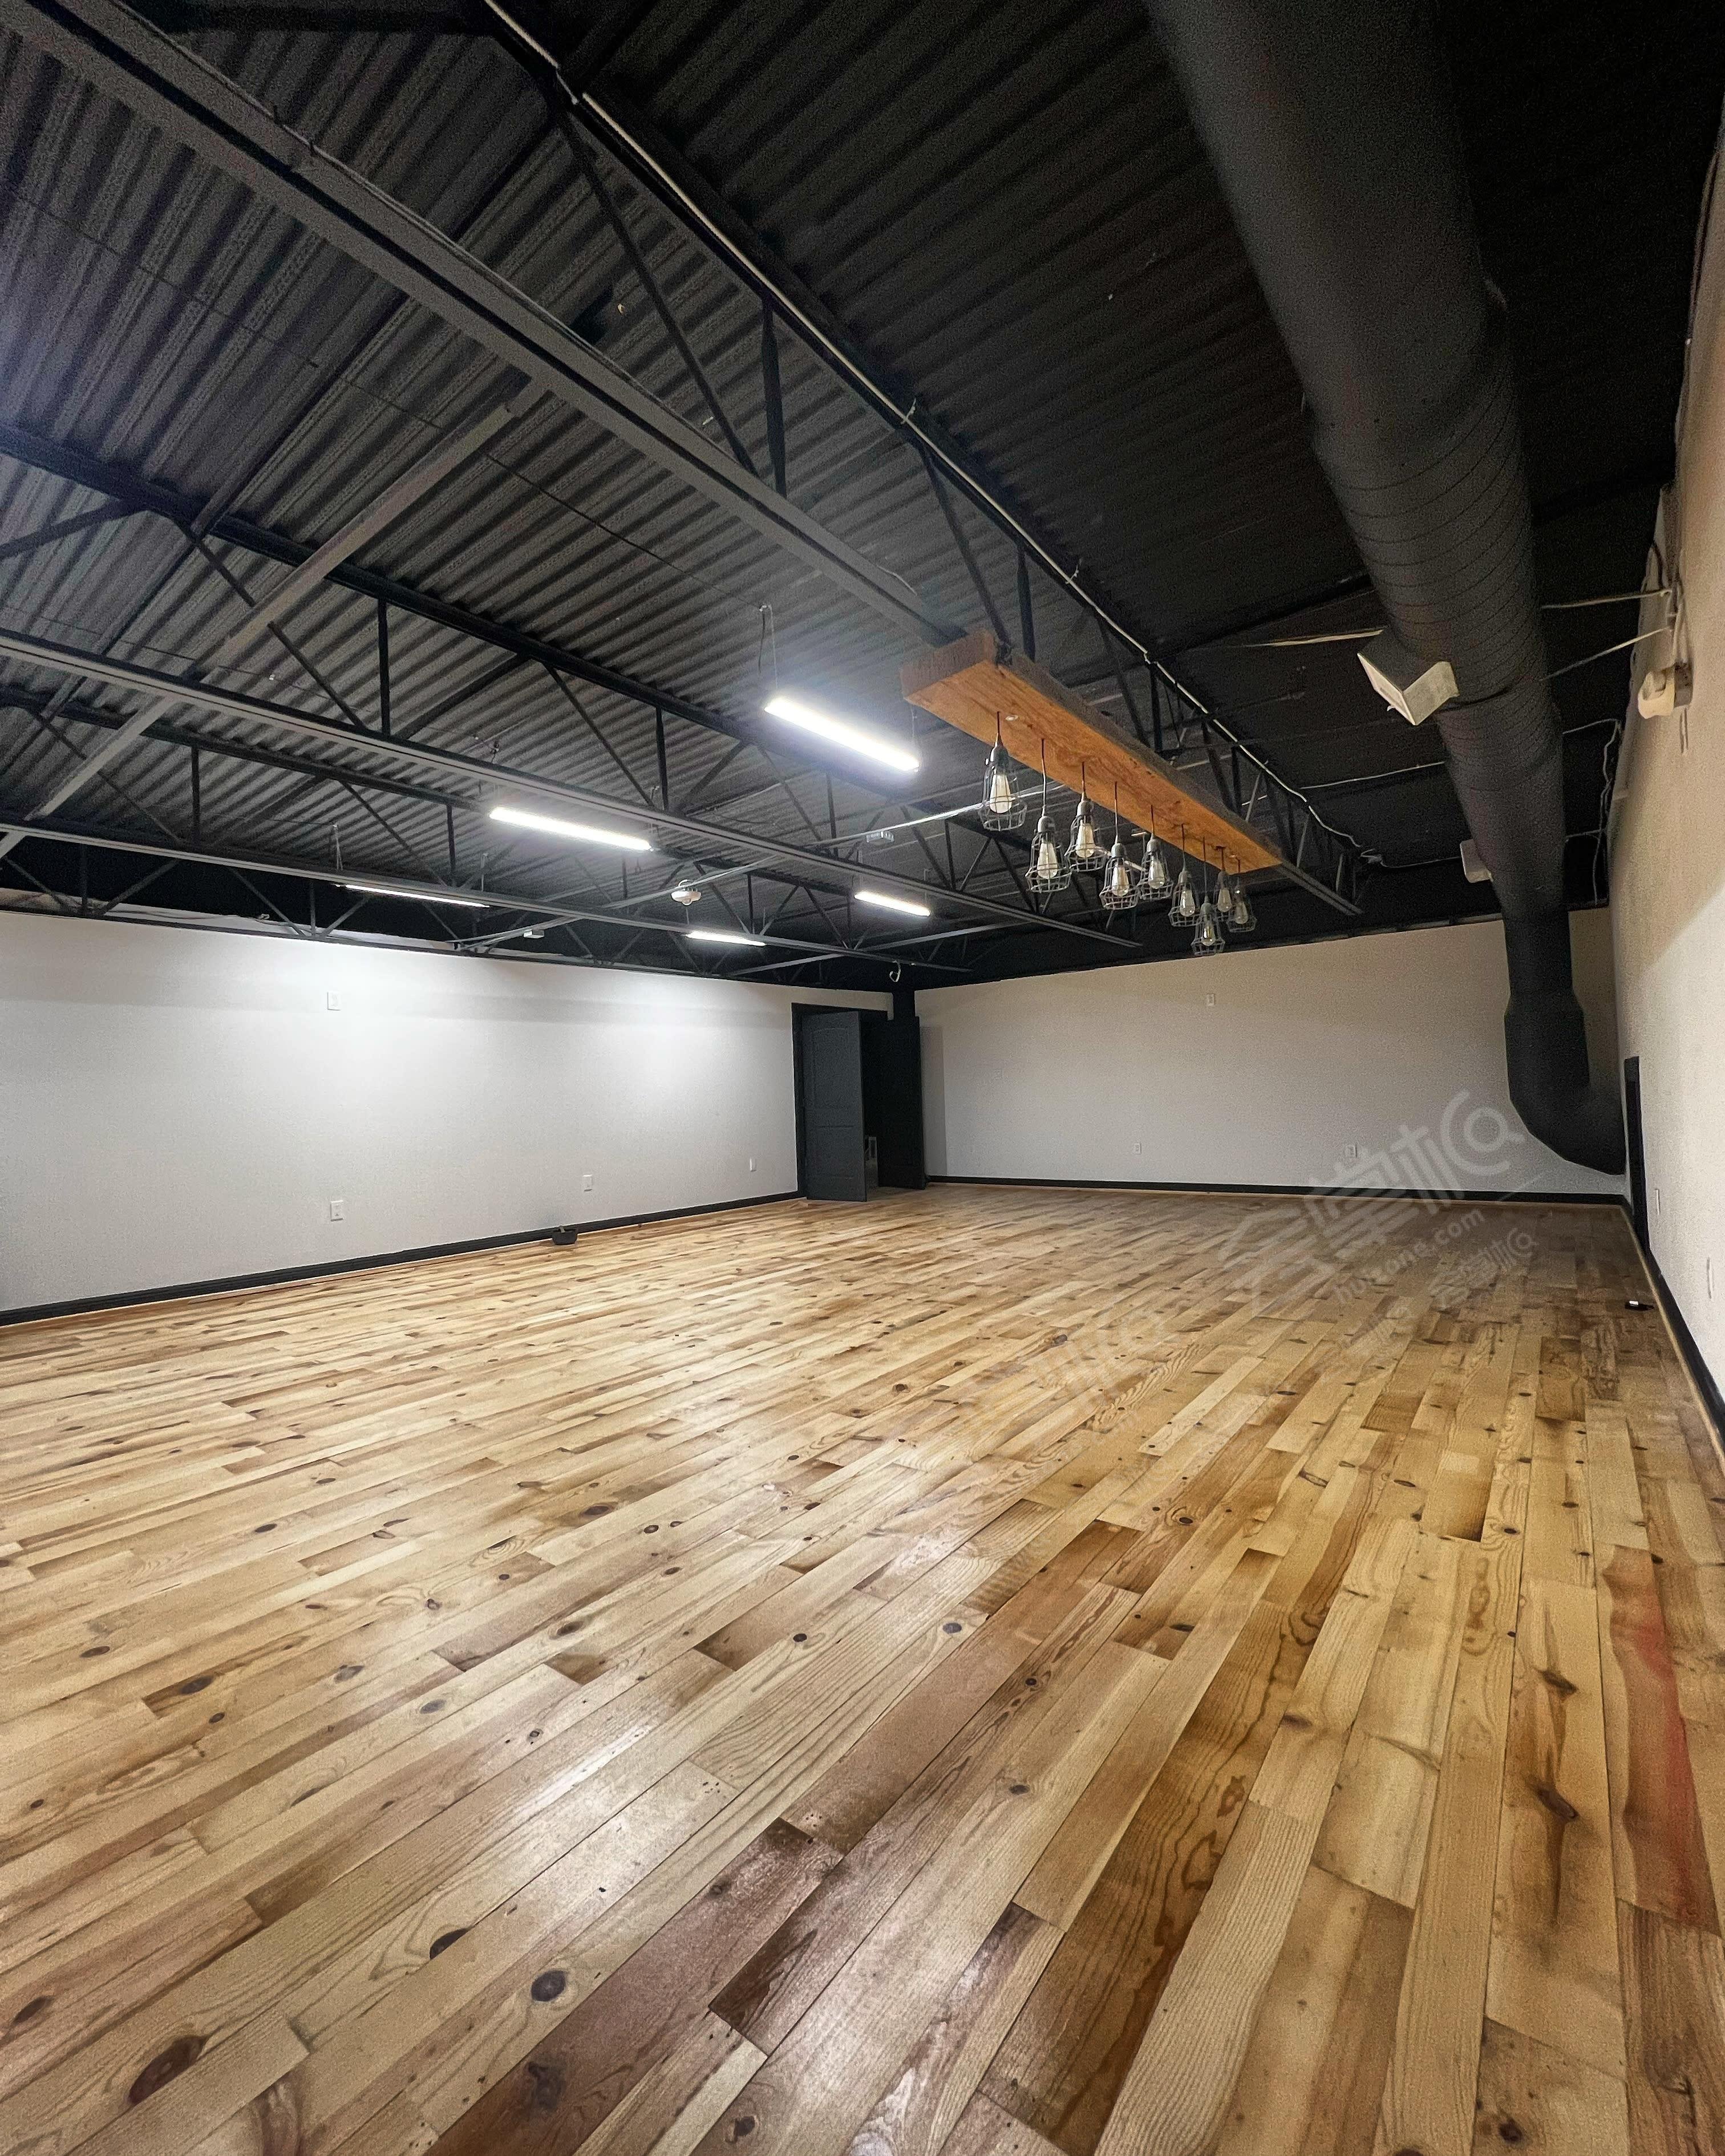 Modern/industrial studio space with wood flooring located near IAH Airport,  59N and FM1960